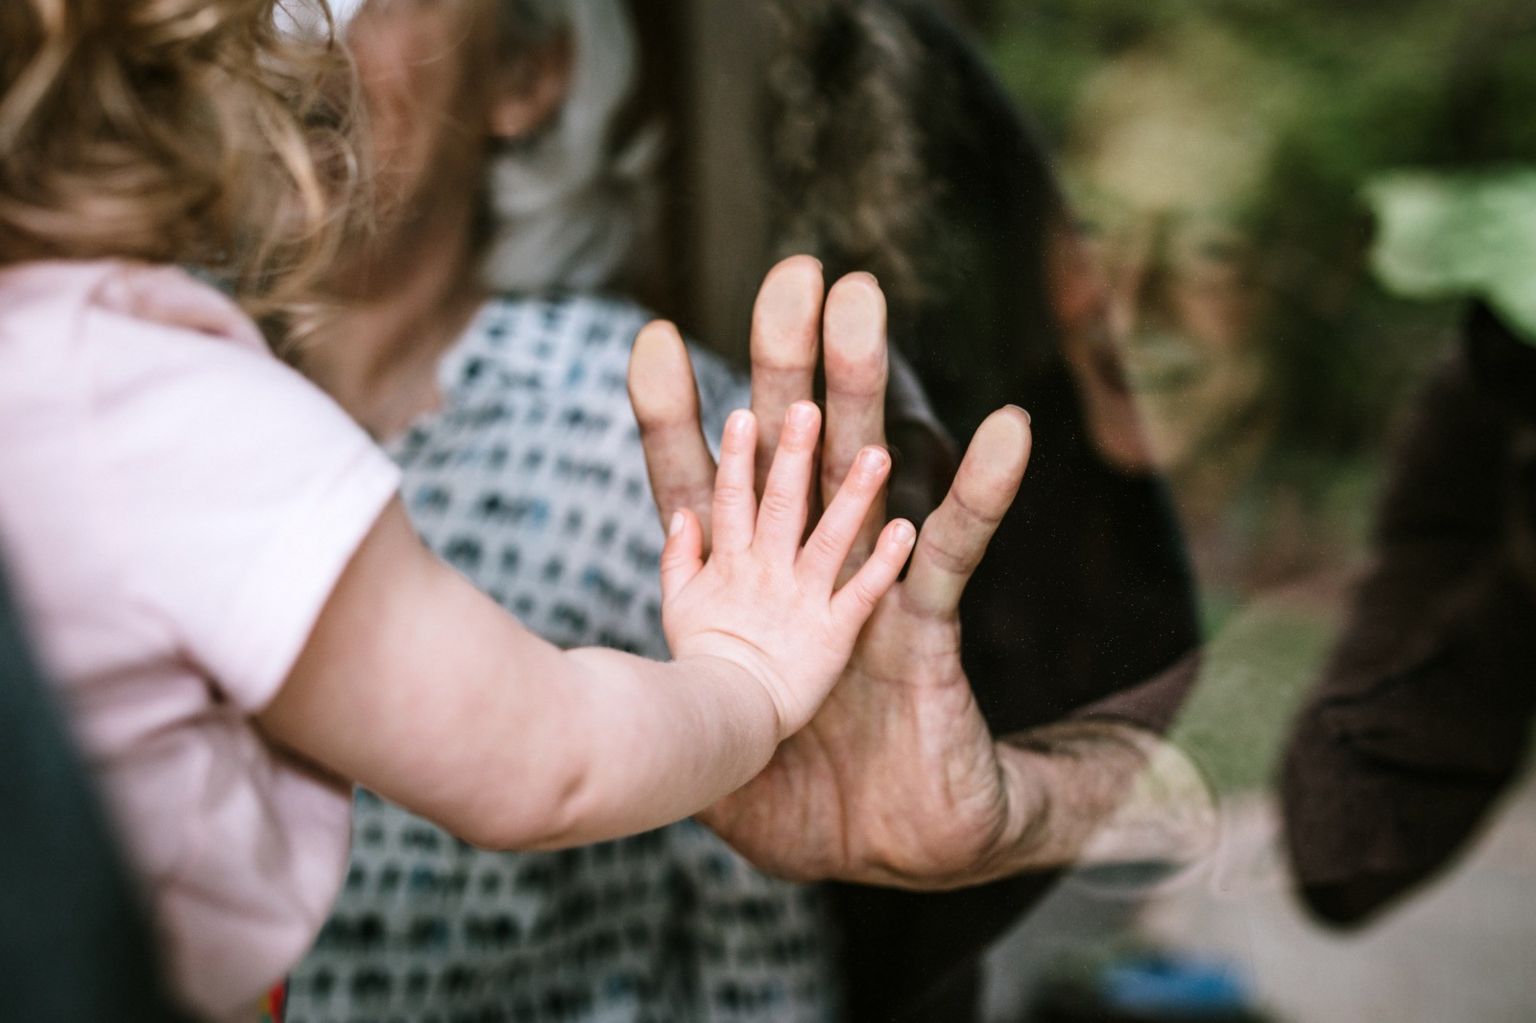 A toddler and an elderly person touching hands through glass